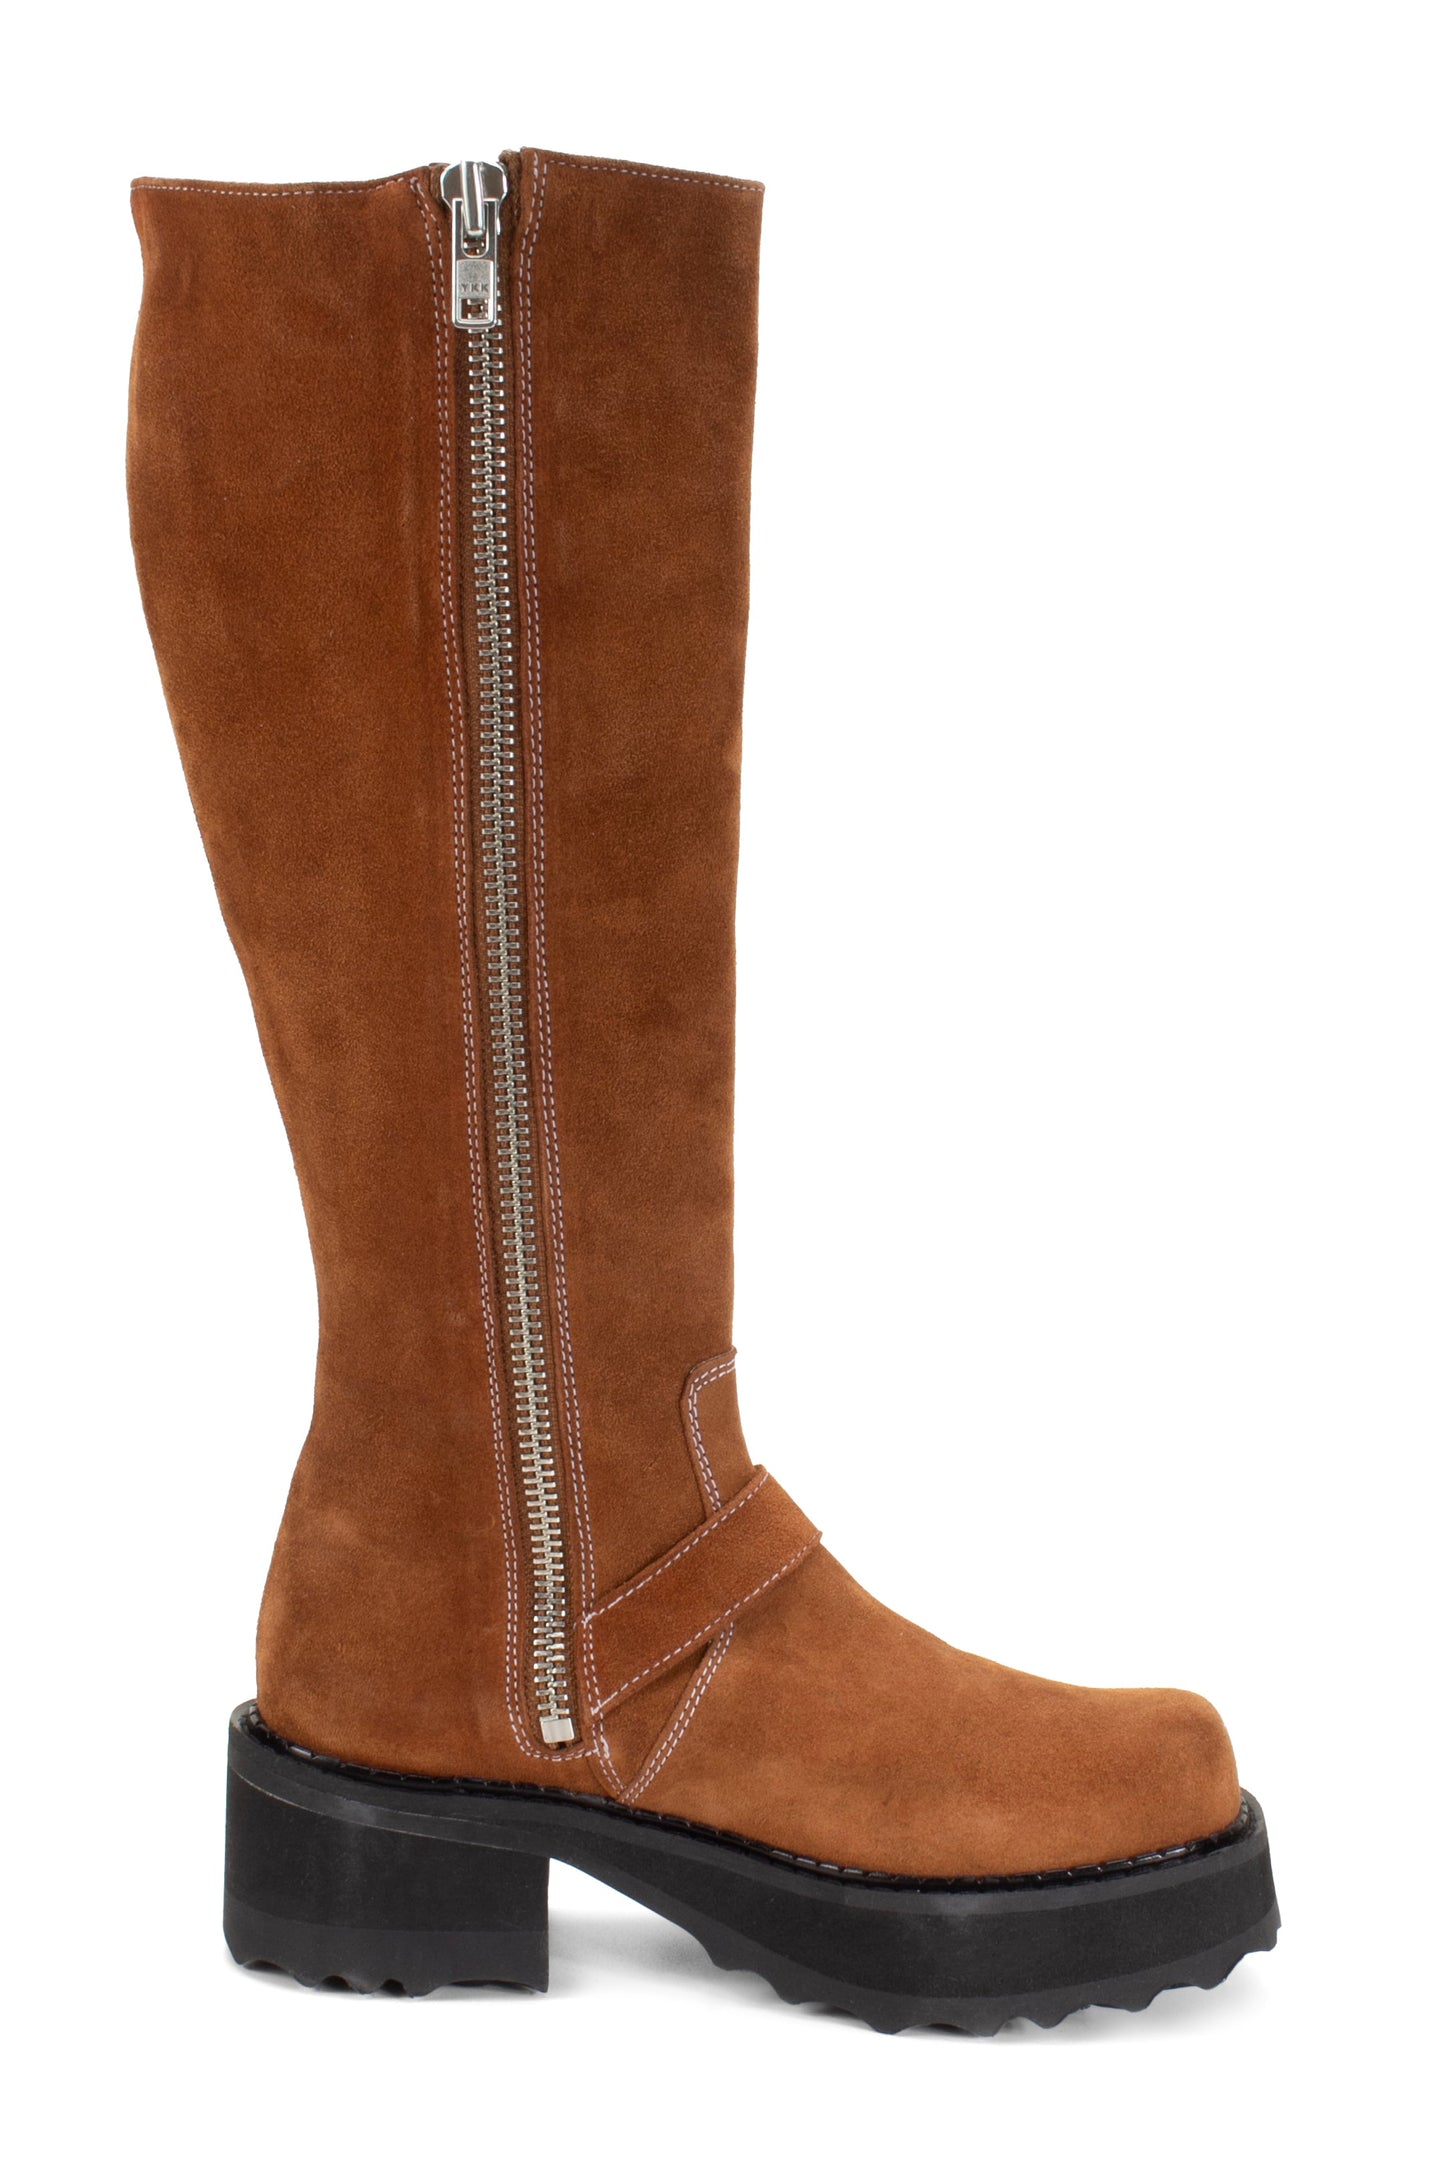 A large zipper inside the boots from top to bottom with white stitches start from the top